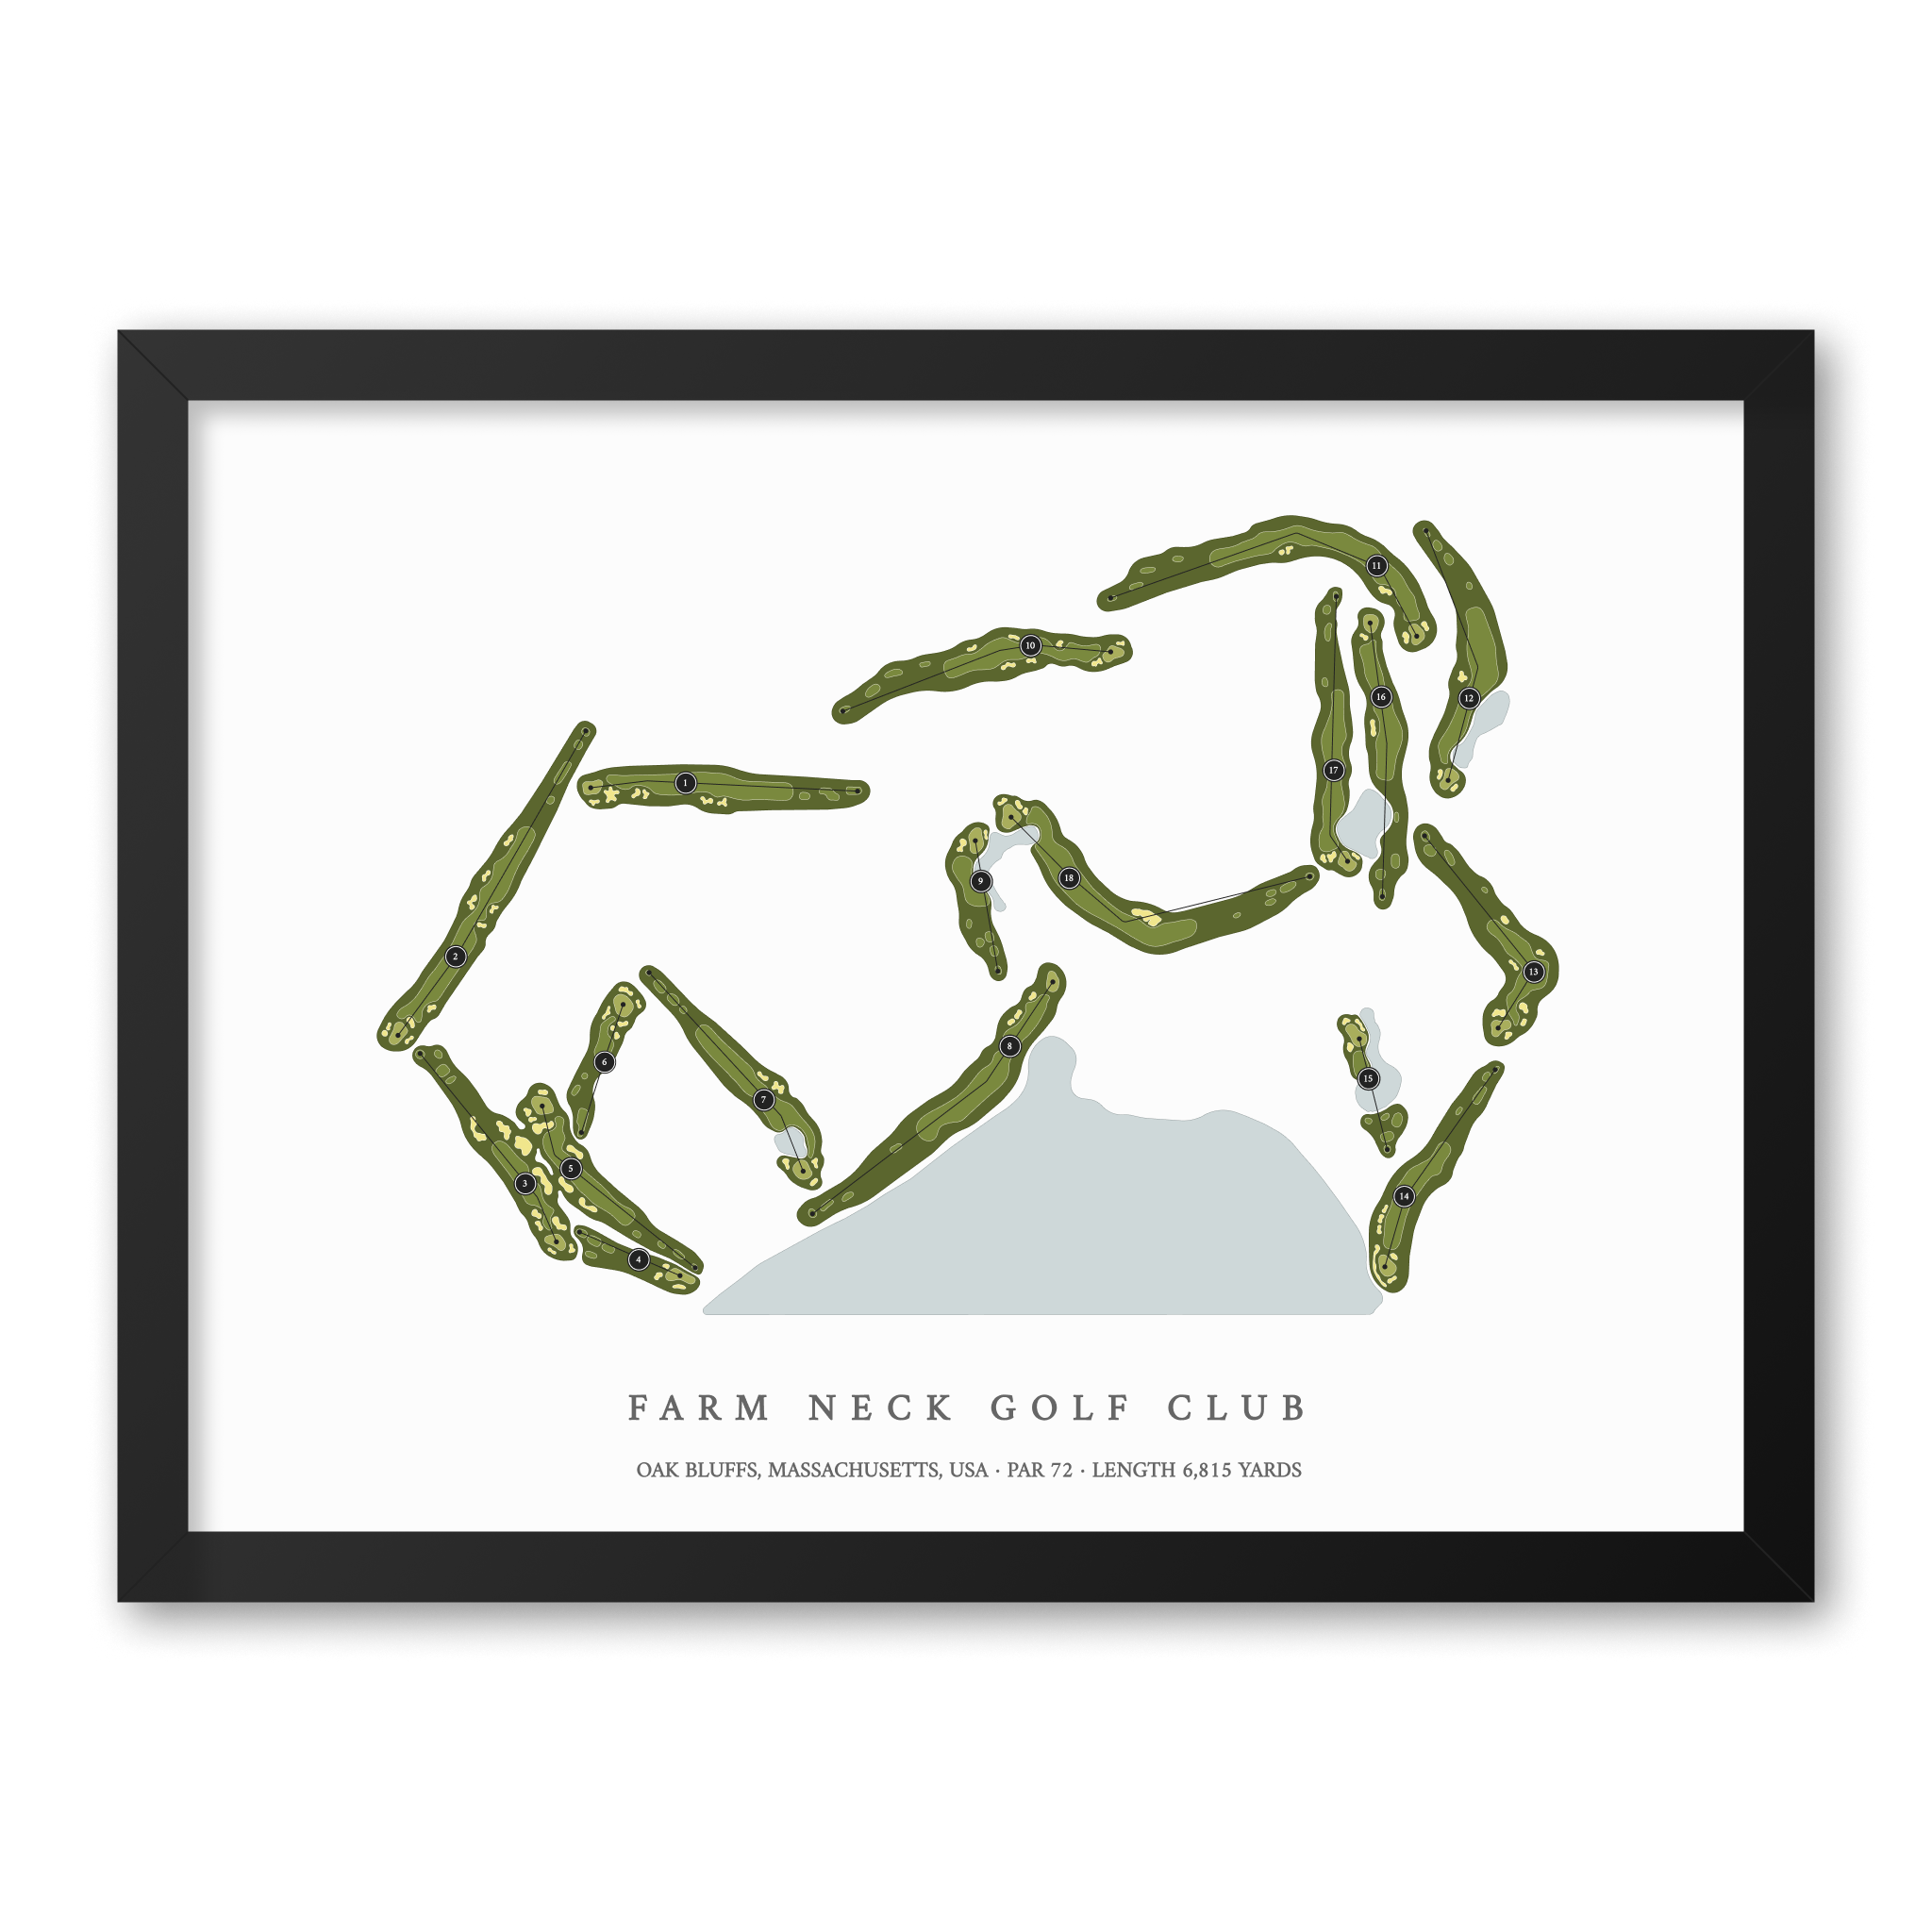 Farm Neck Golf Club| Golf Course Print | Black Frame With Hole Numbers #hole numbers_yes